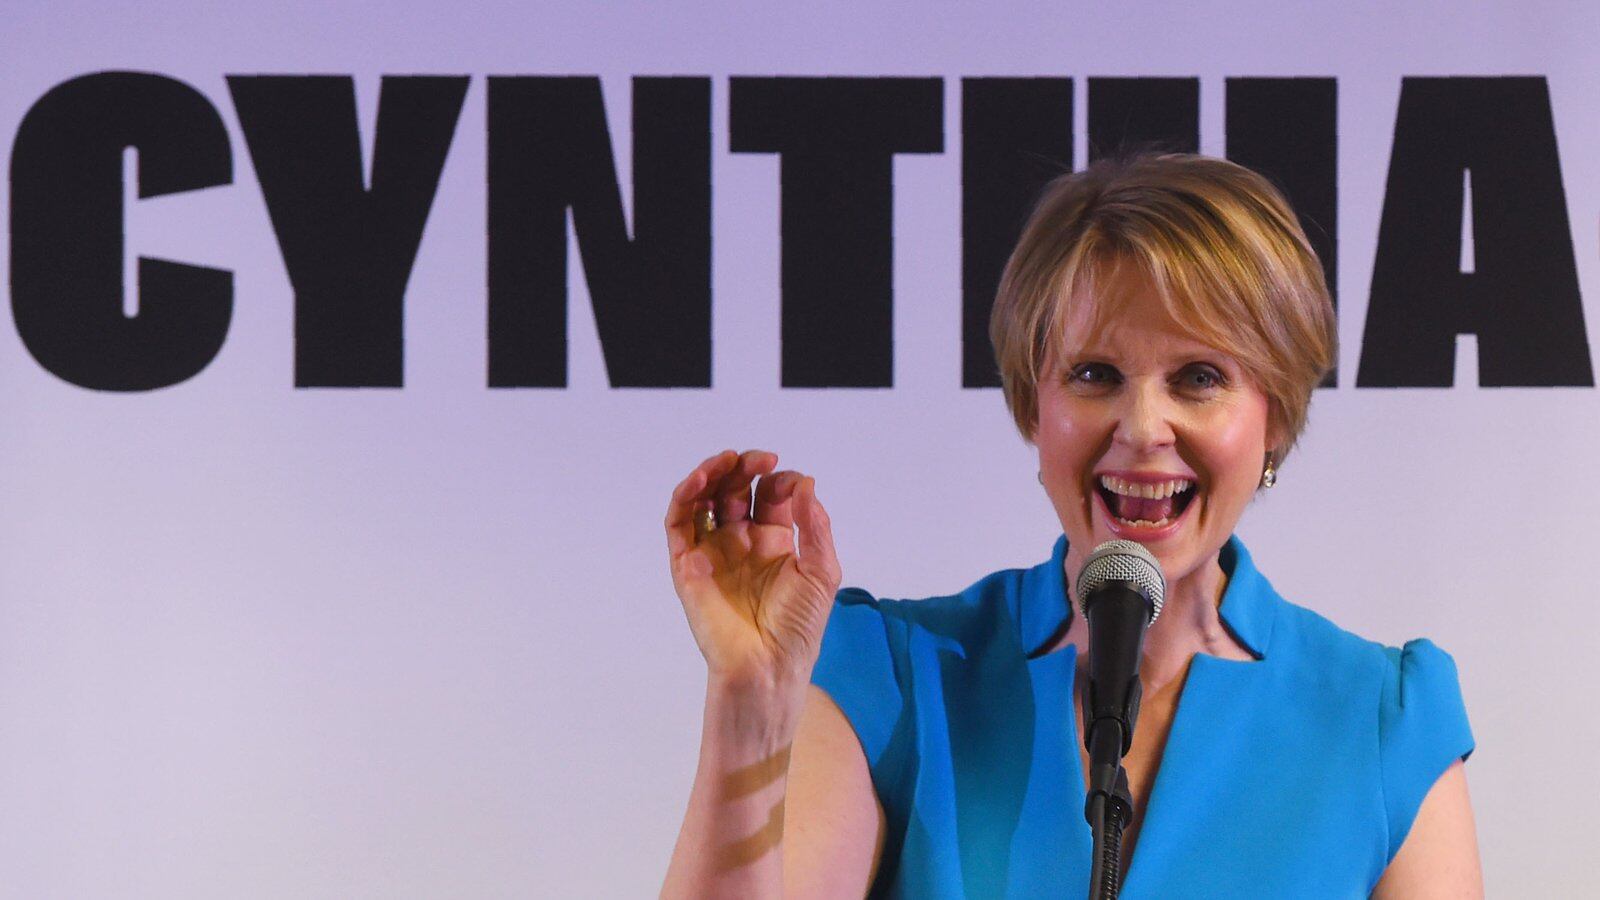 Former Sex and the City star Cynthia Nixon speaks to people at the Bethesda Healing Center in  Brooklyn, New York on March 20, 2018 at her first event since announcing that shes running for governor of New York.